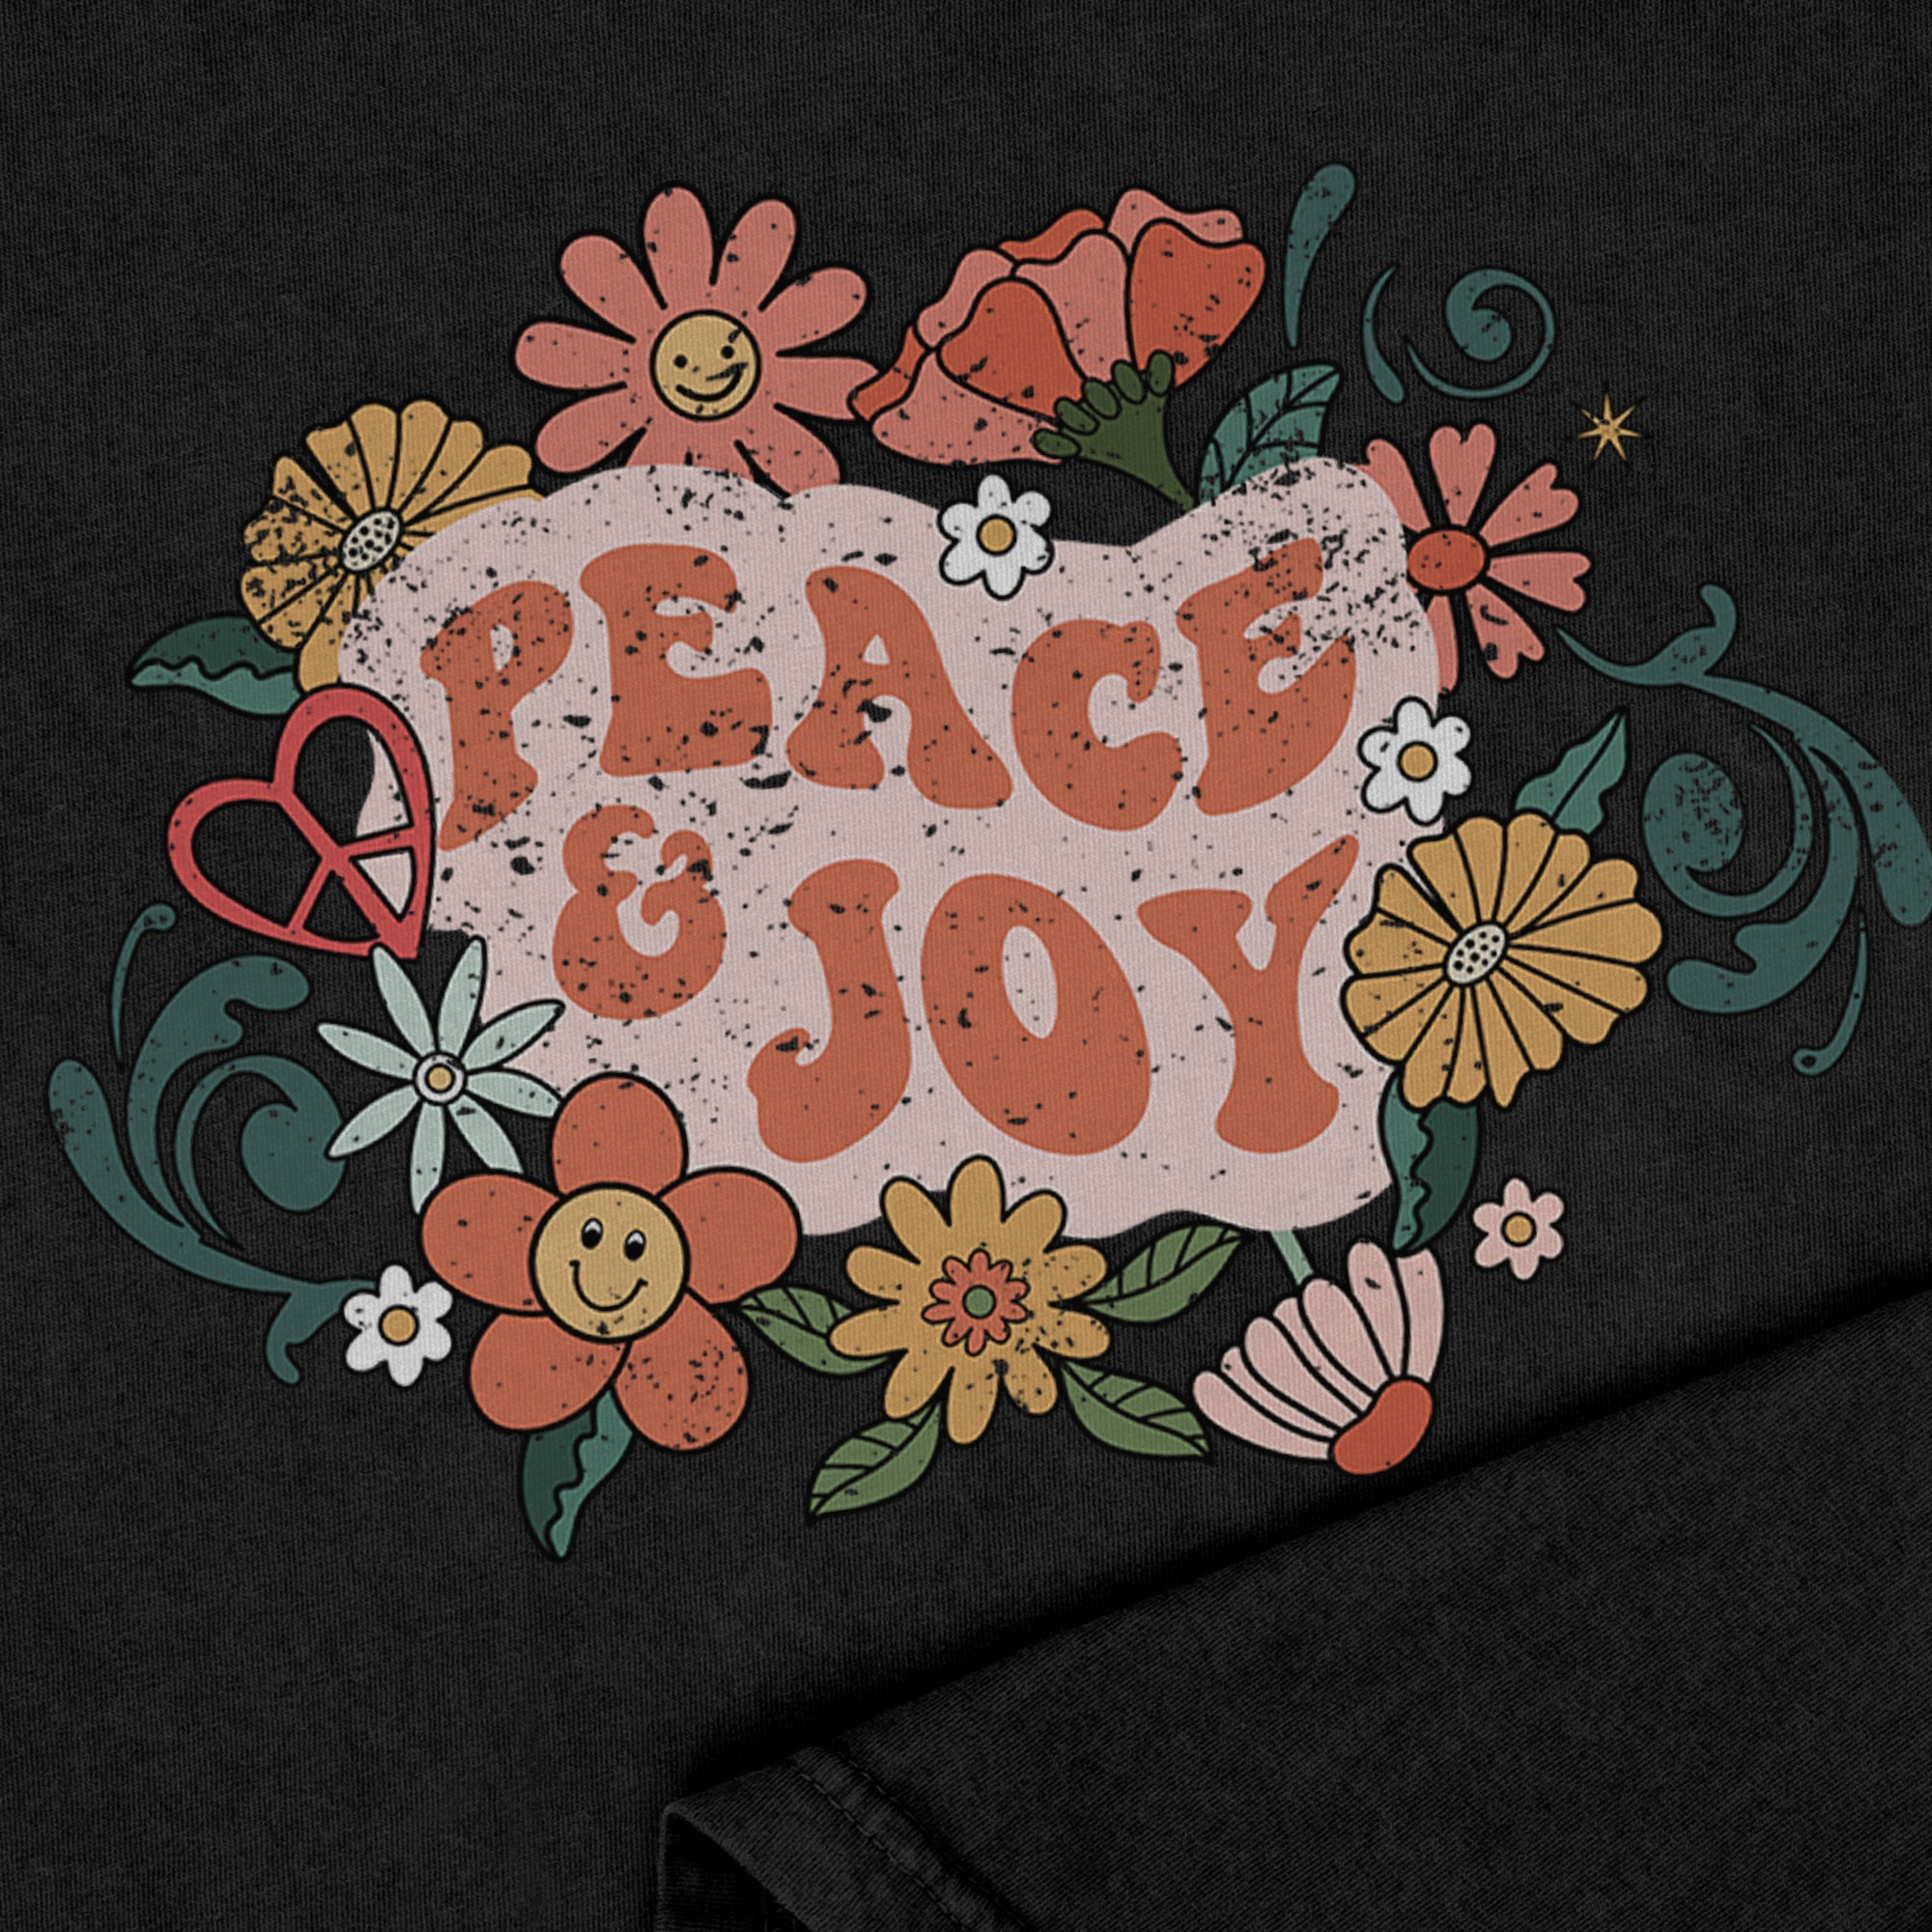 Peace & Joy Graphic Oversized Shirt for Women & Men Garment-Dyed Graphic Tee